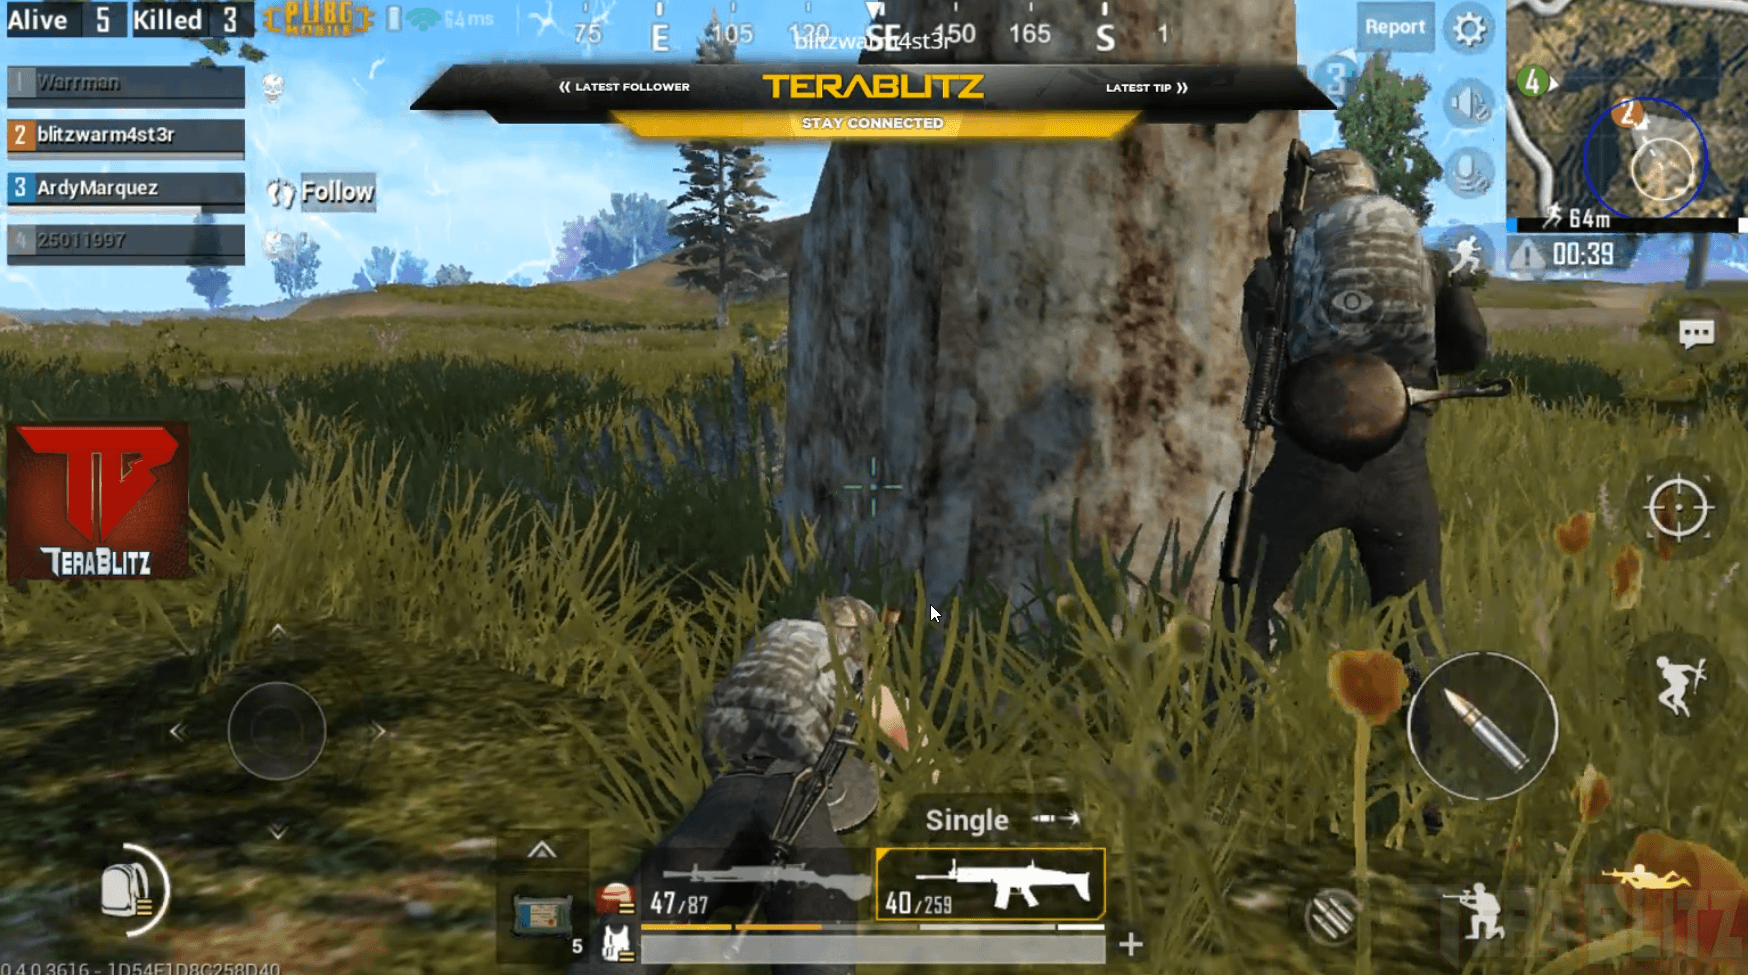 Ultimate PUBG survival manual with tips, tricks and secrets